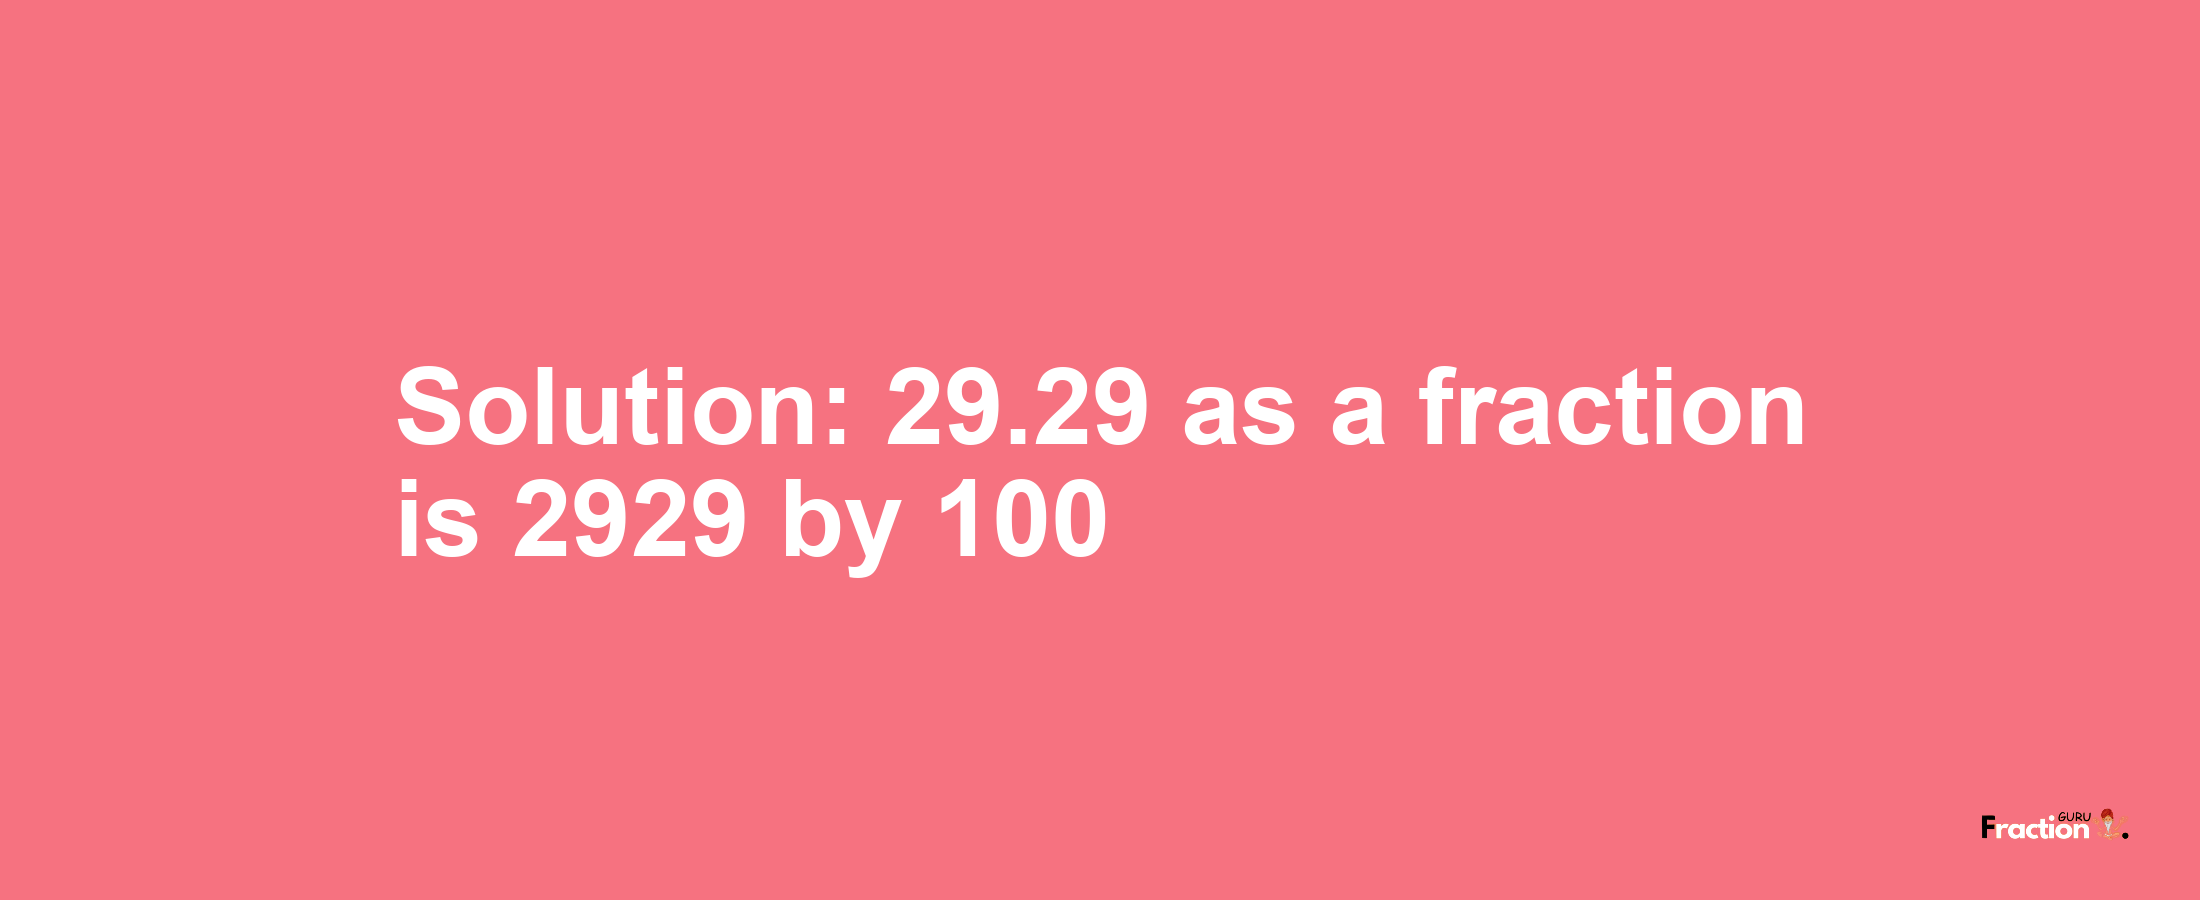 Solution:29.29 as a fraction is 2929/100